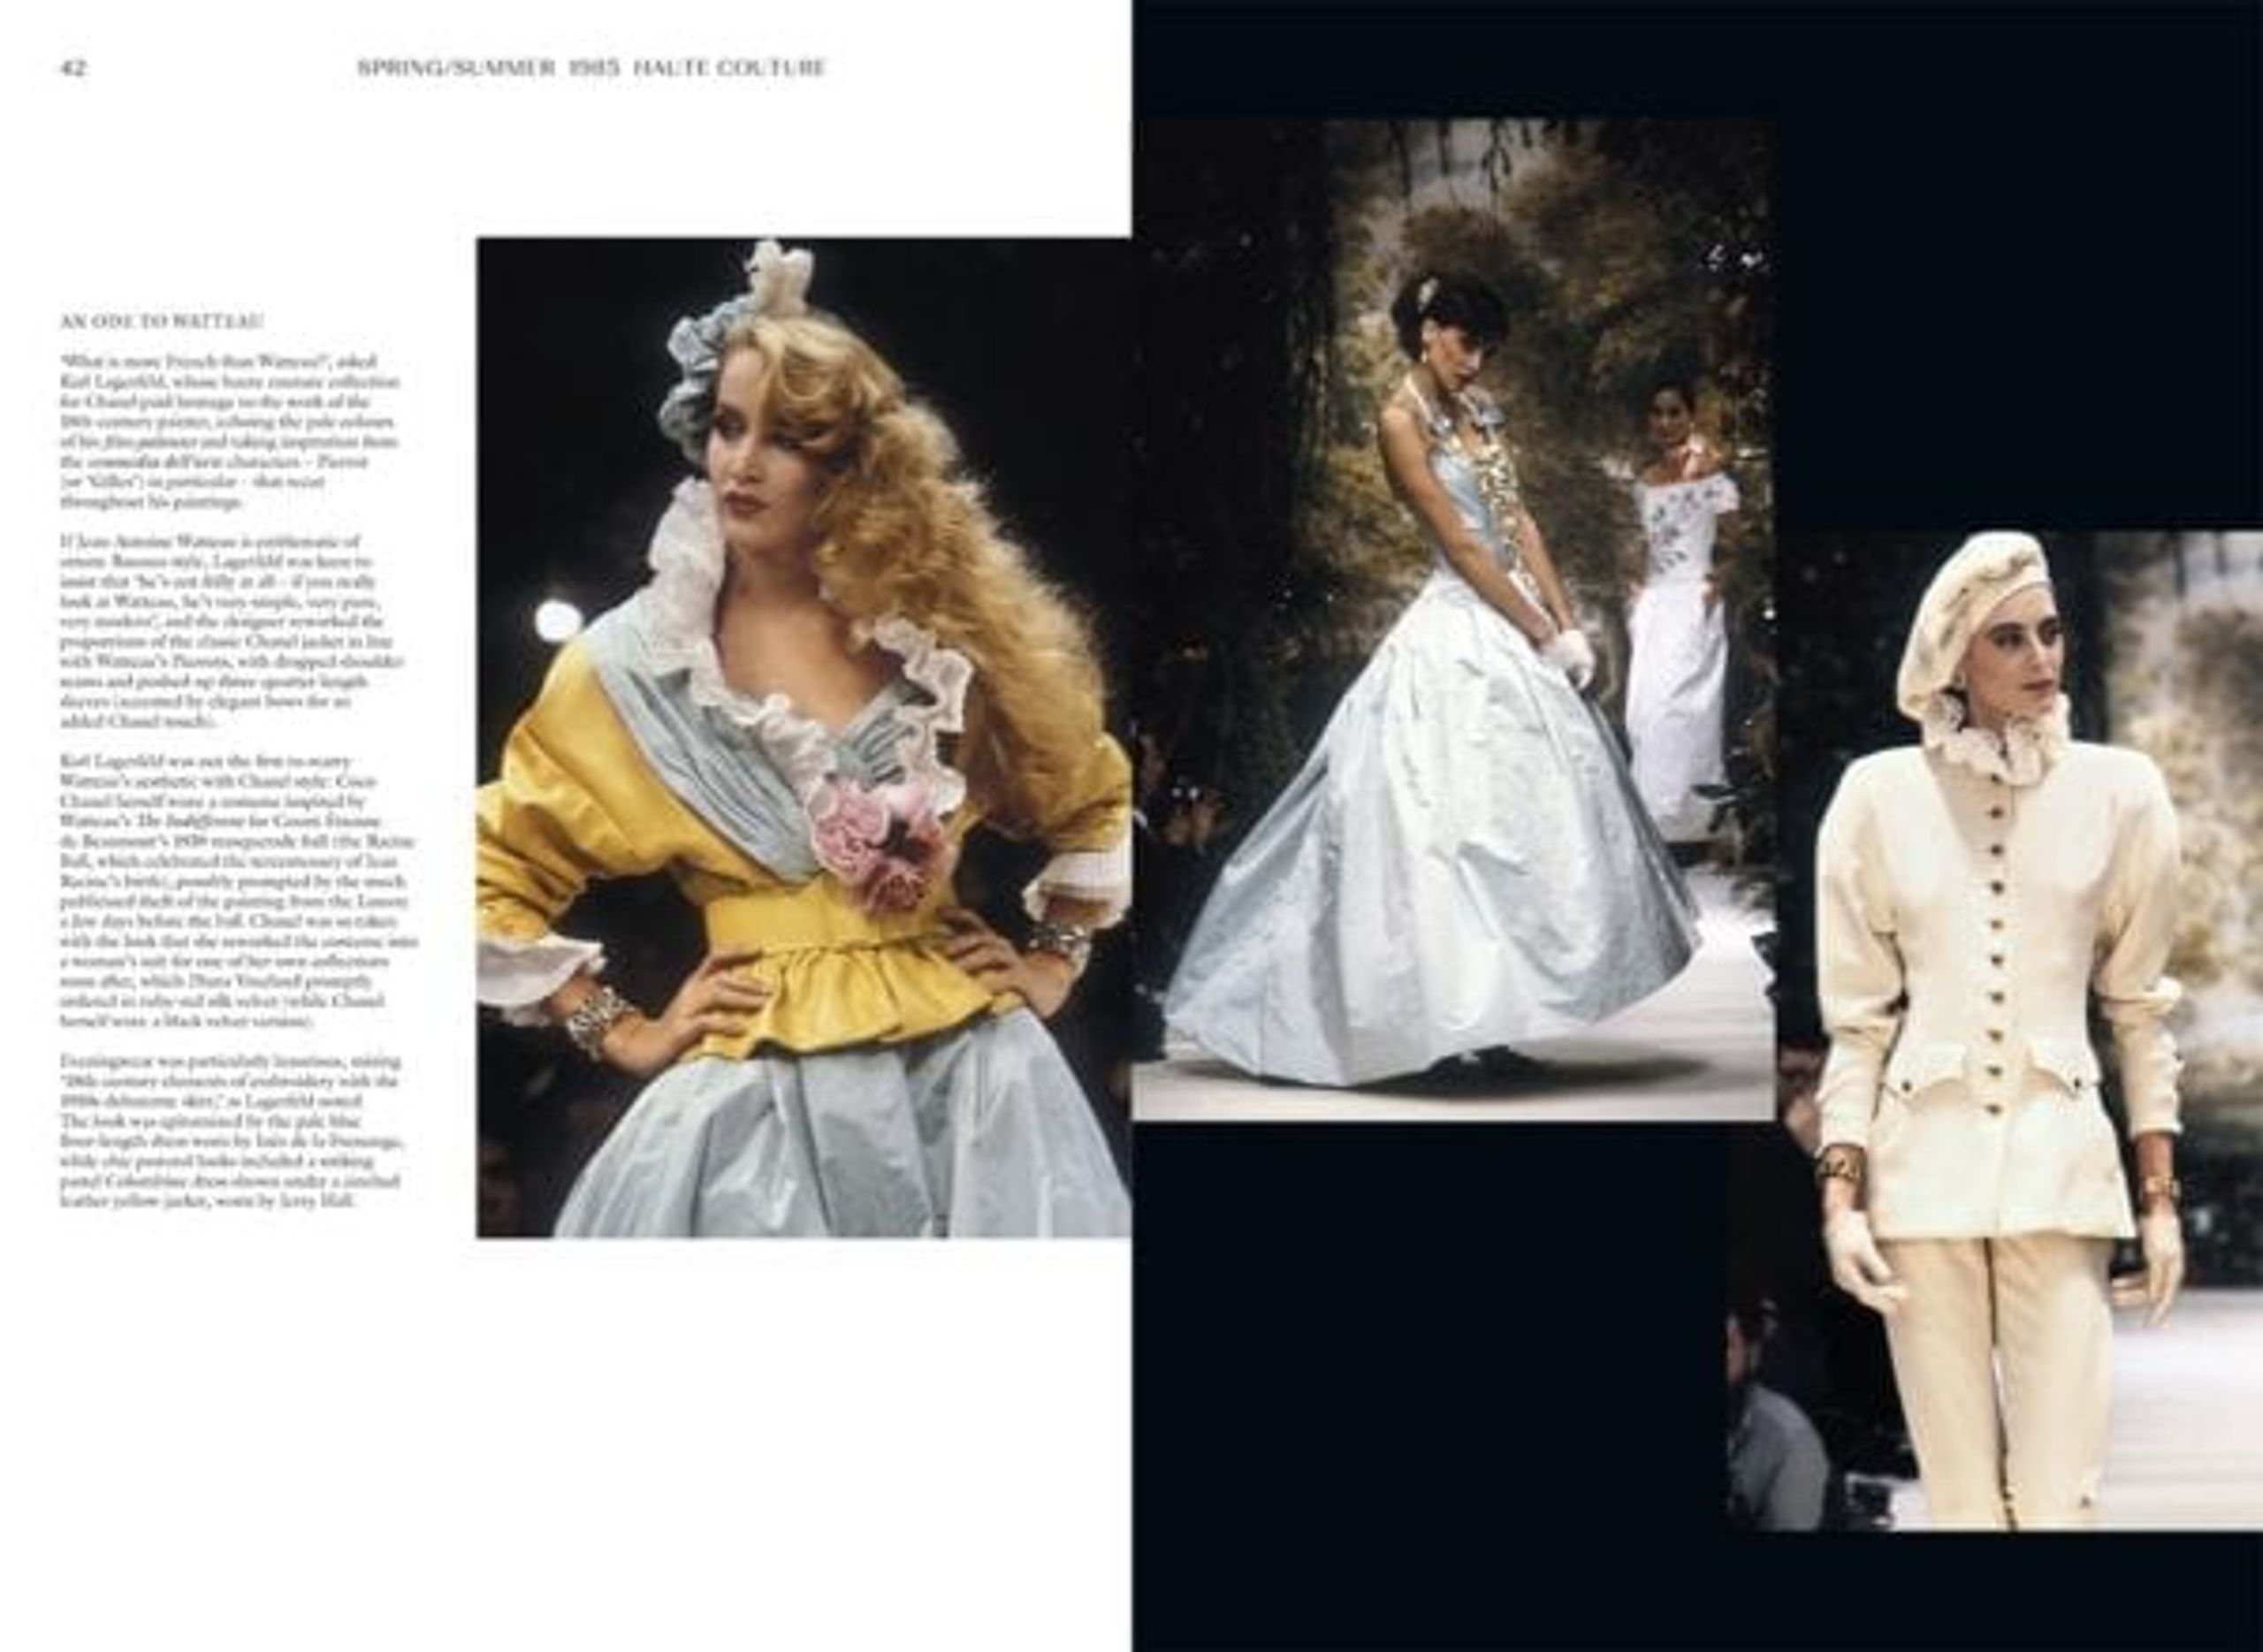 Chanel - Catwalk - Book - New Mags